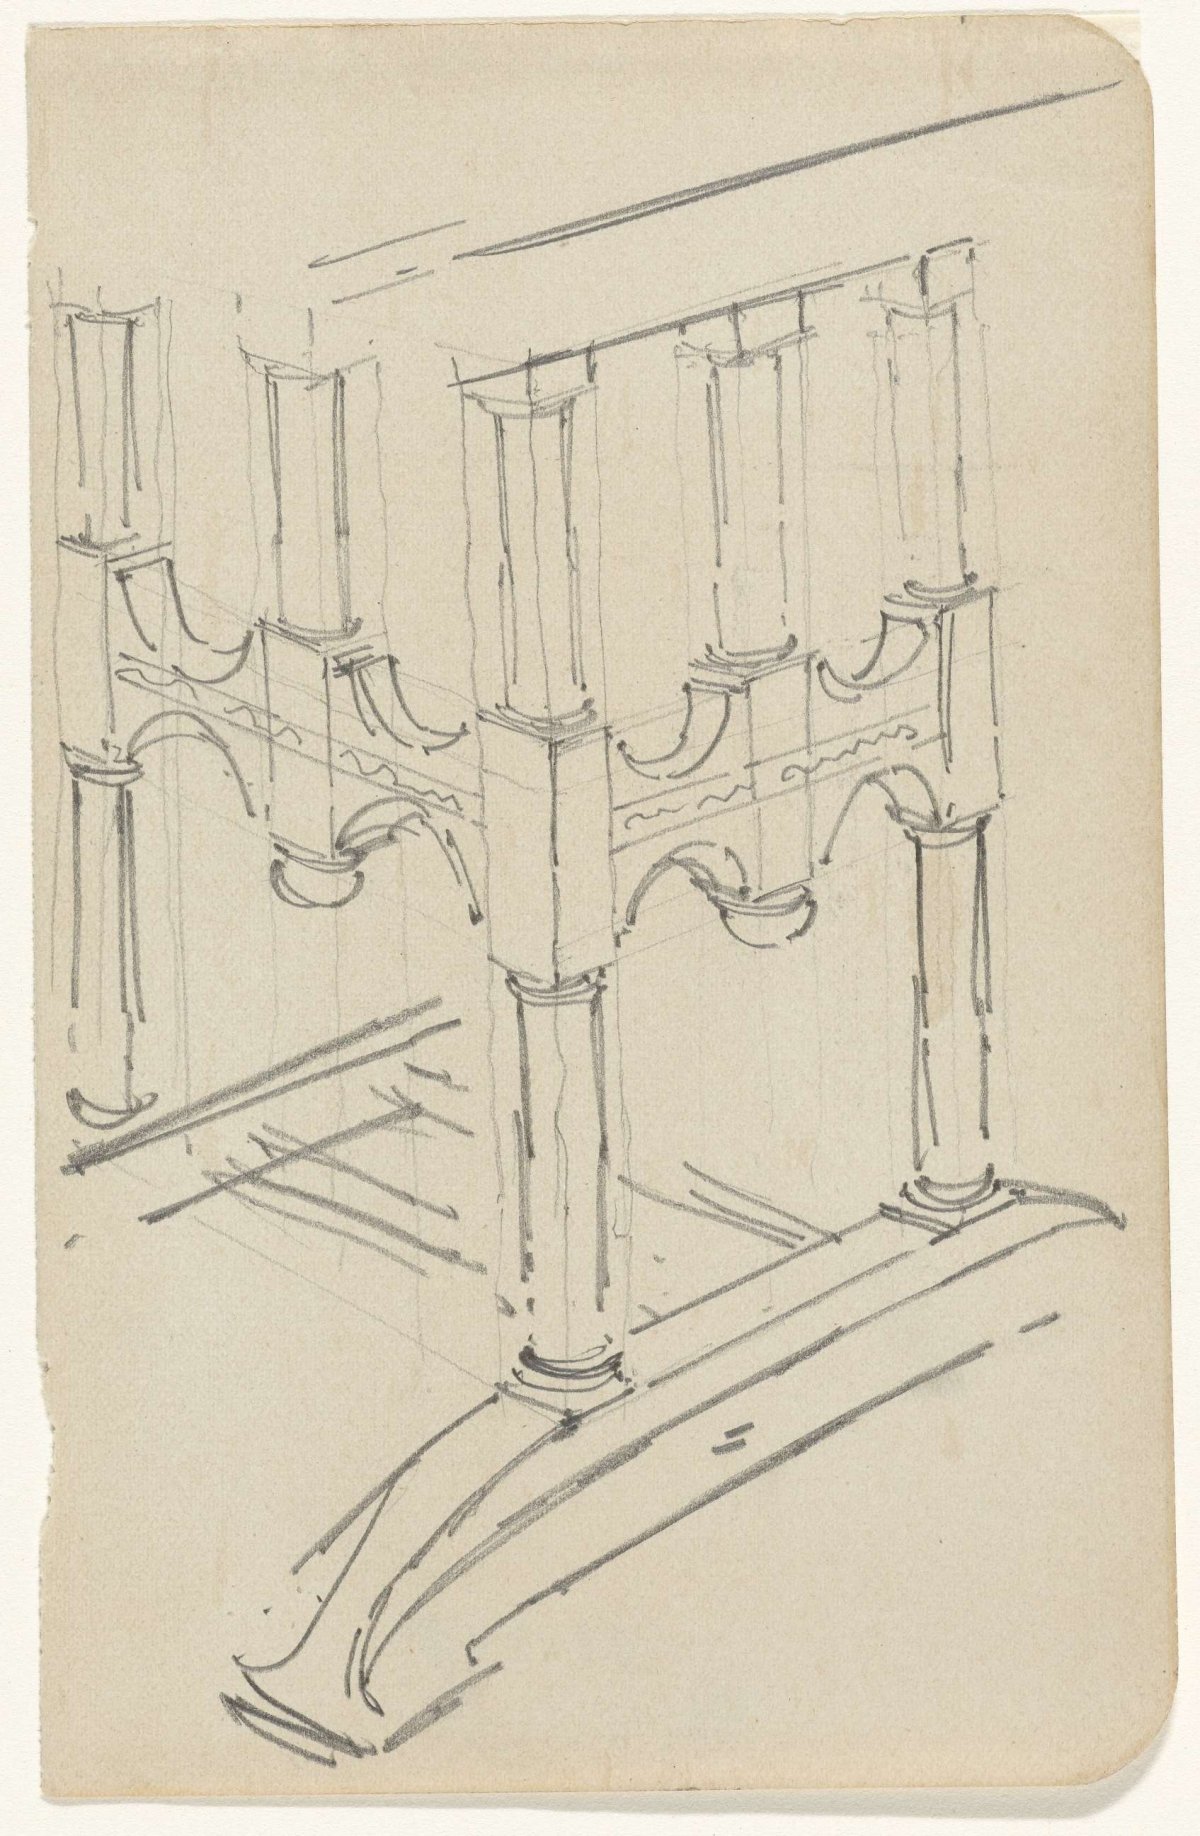 Sketch of the base of a small table, Gerrit Willem Dijsselhof, 1876 - 1924